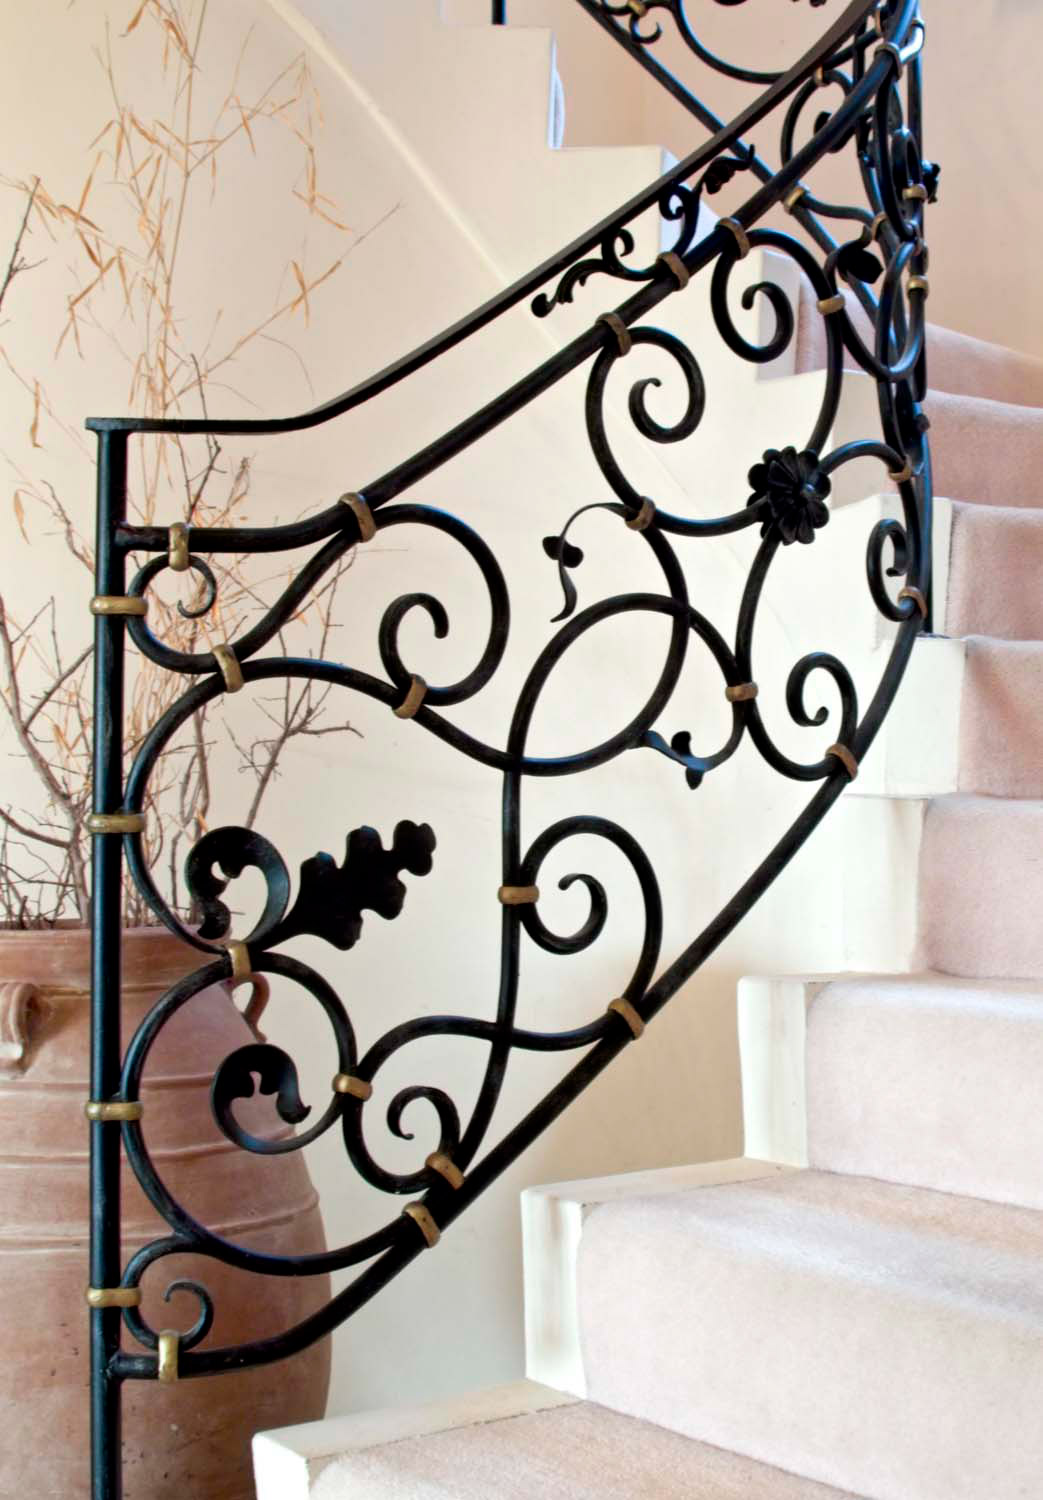 4 French black forged iron handrail and white stairs